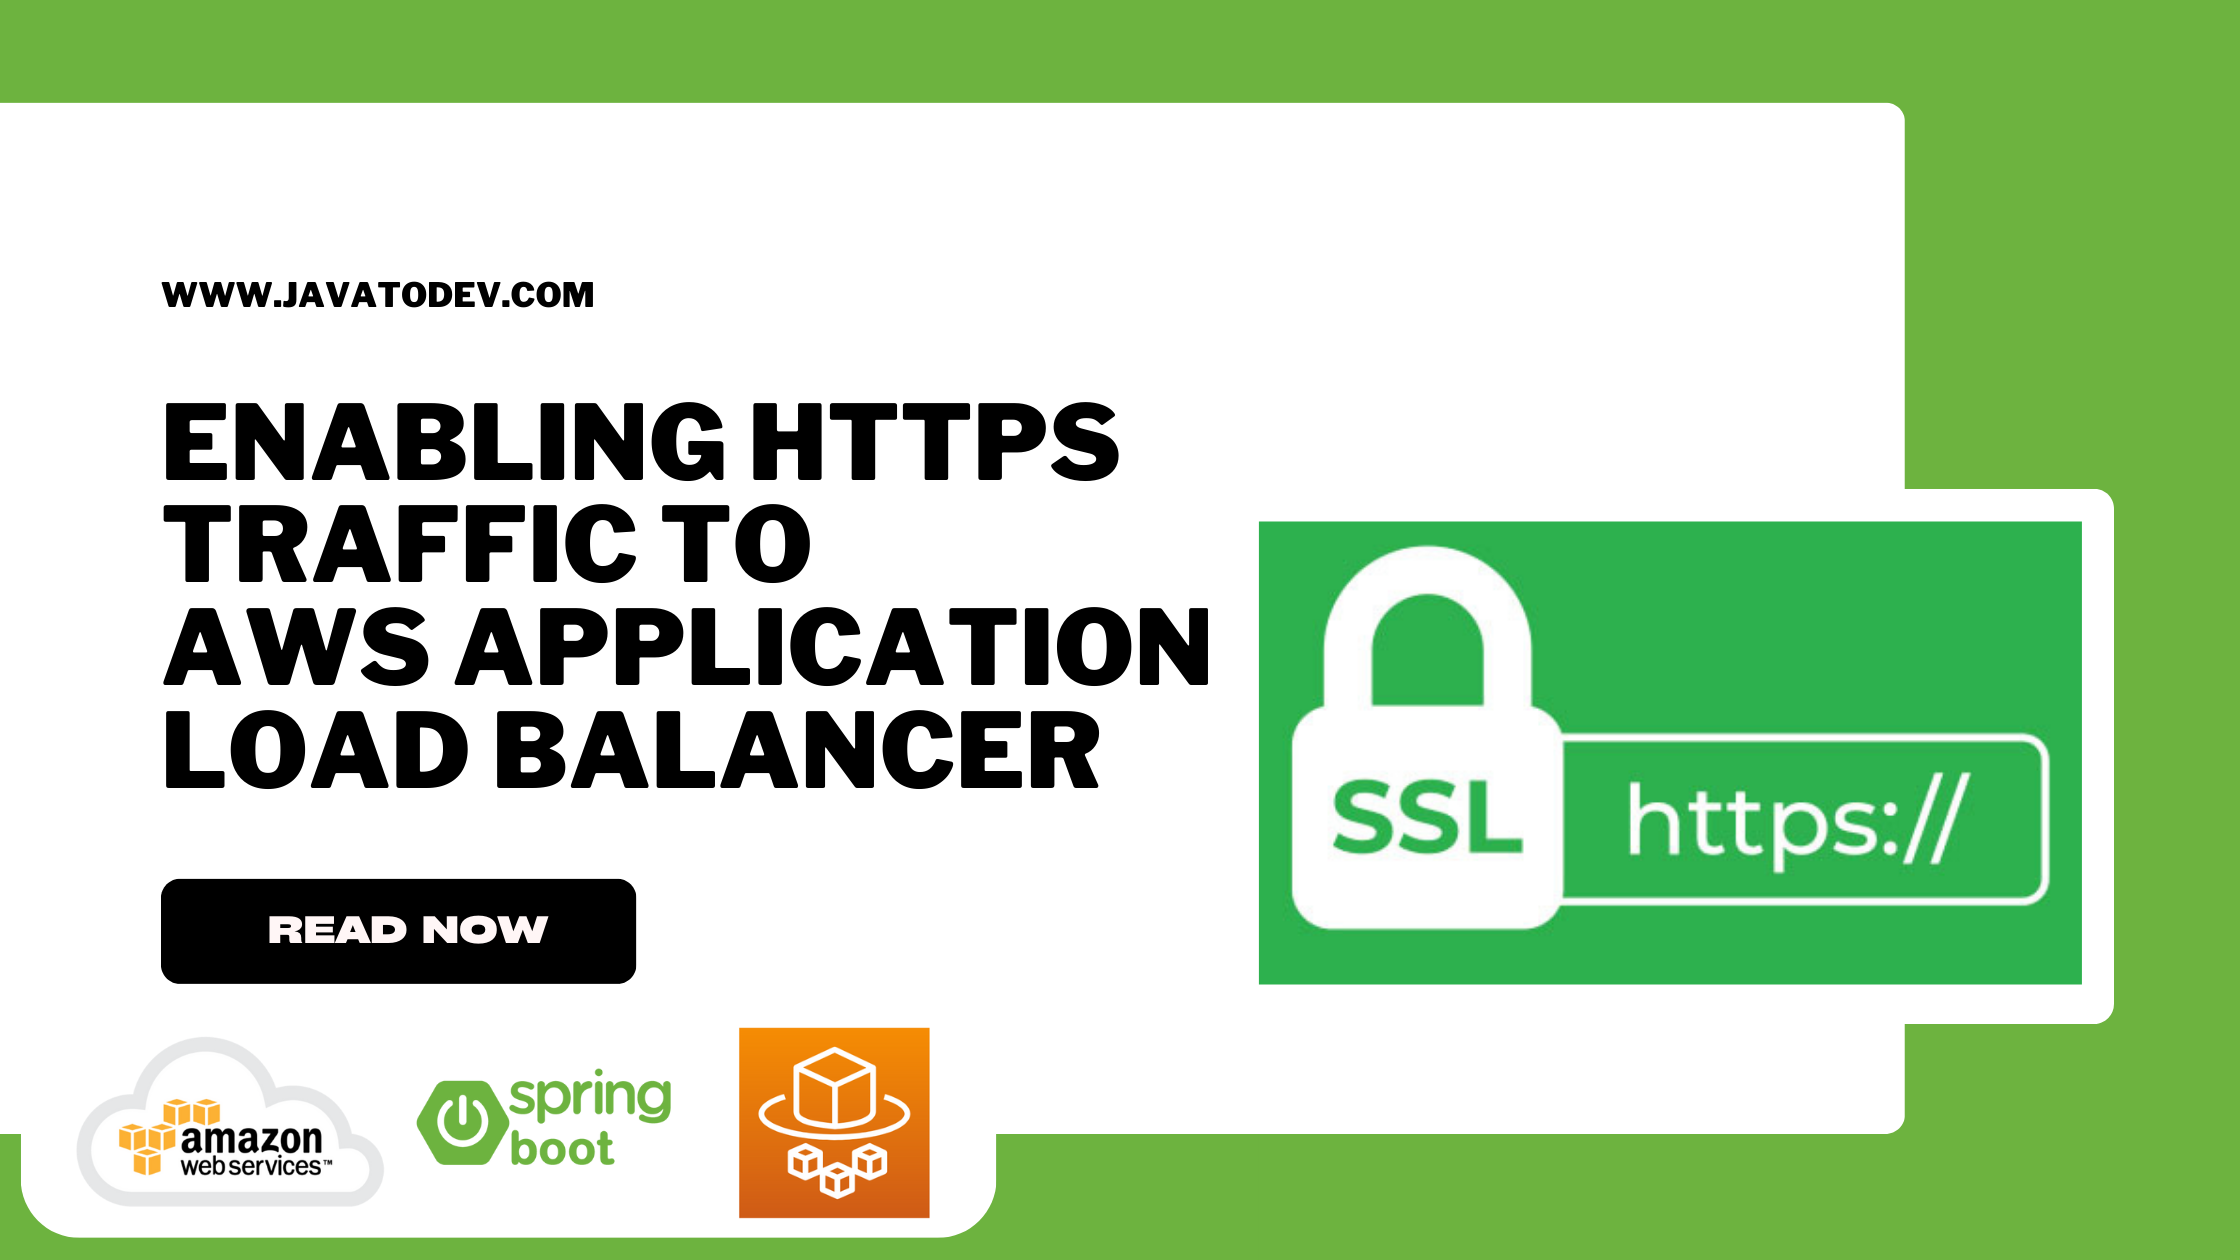 How to Enable HTTPS Traffic To AWS Application Load Balancer